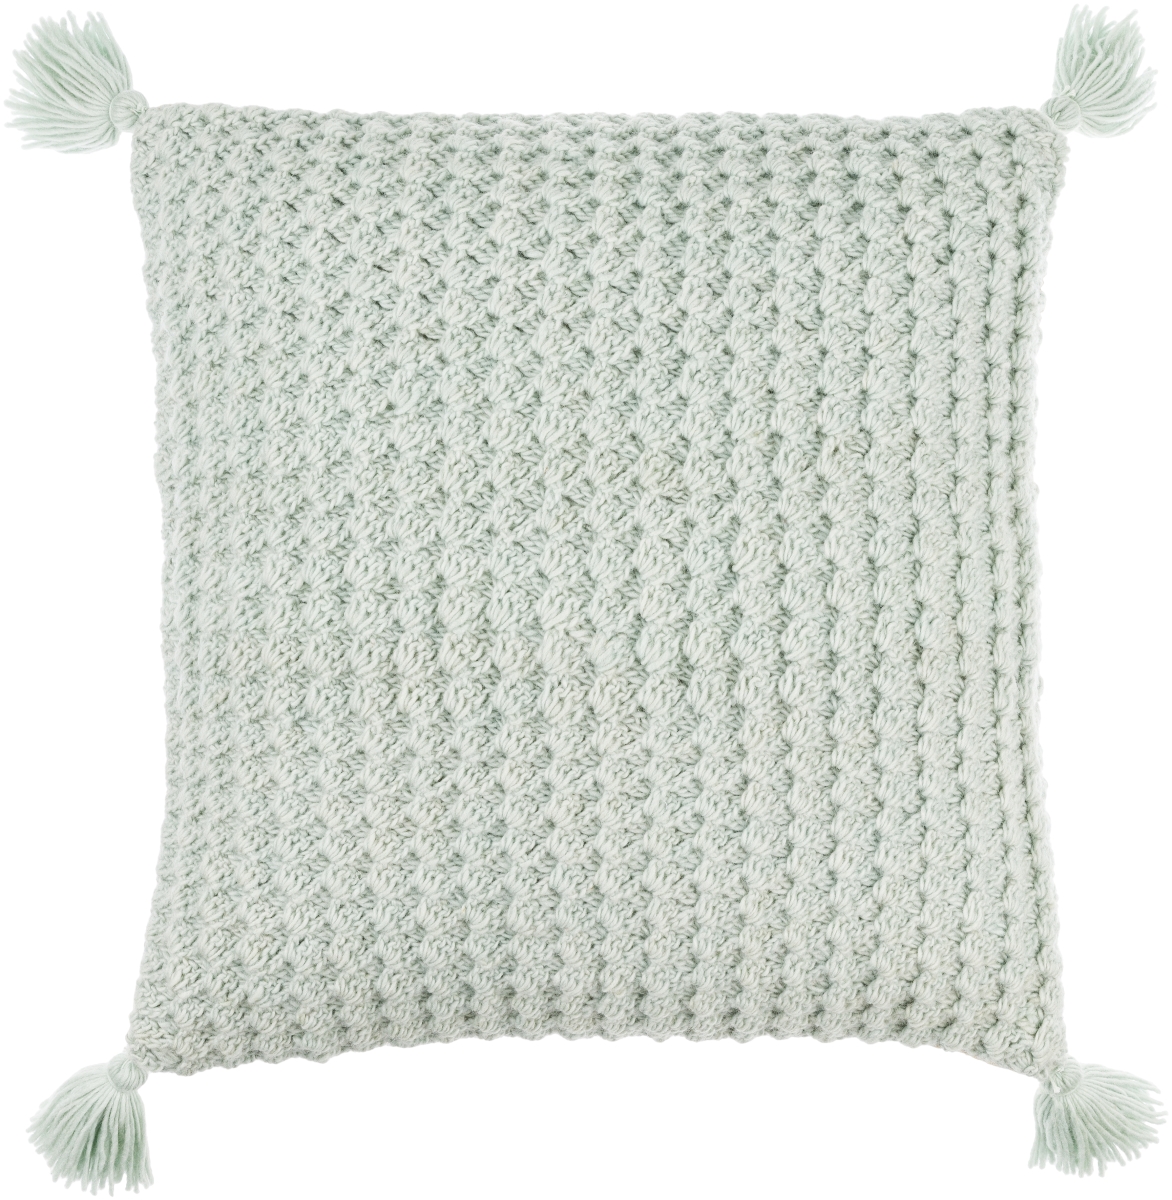 Picture of Livabliss MKO017-1818 18 x 18 in. Makrome Square Pillow Cover